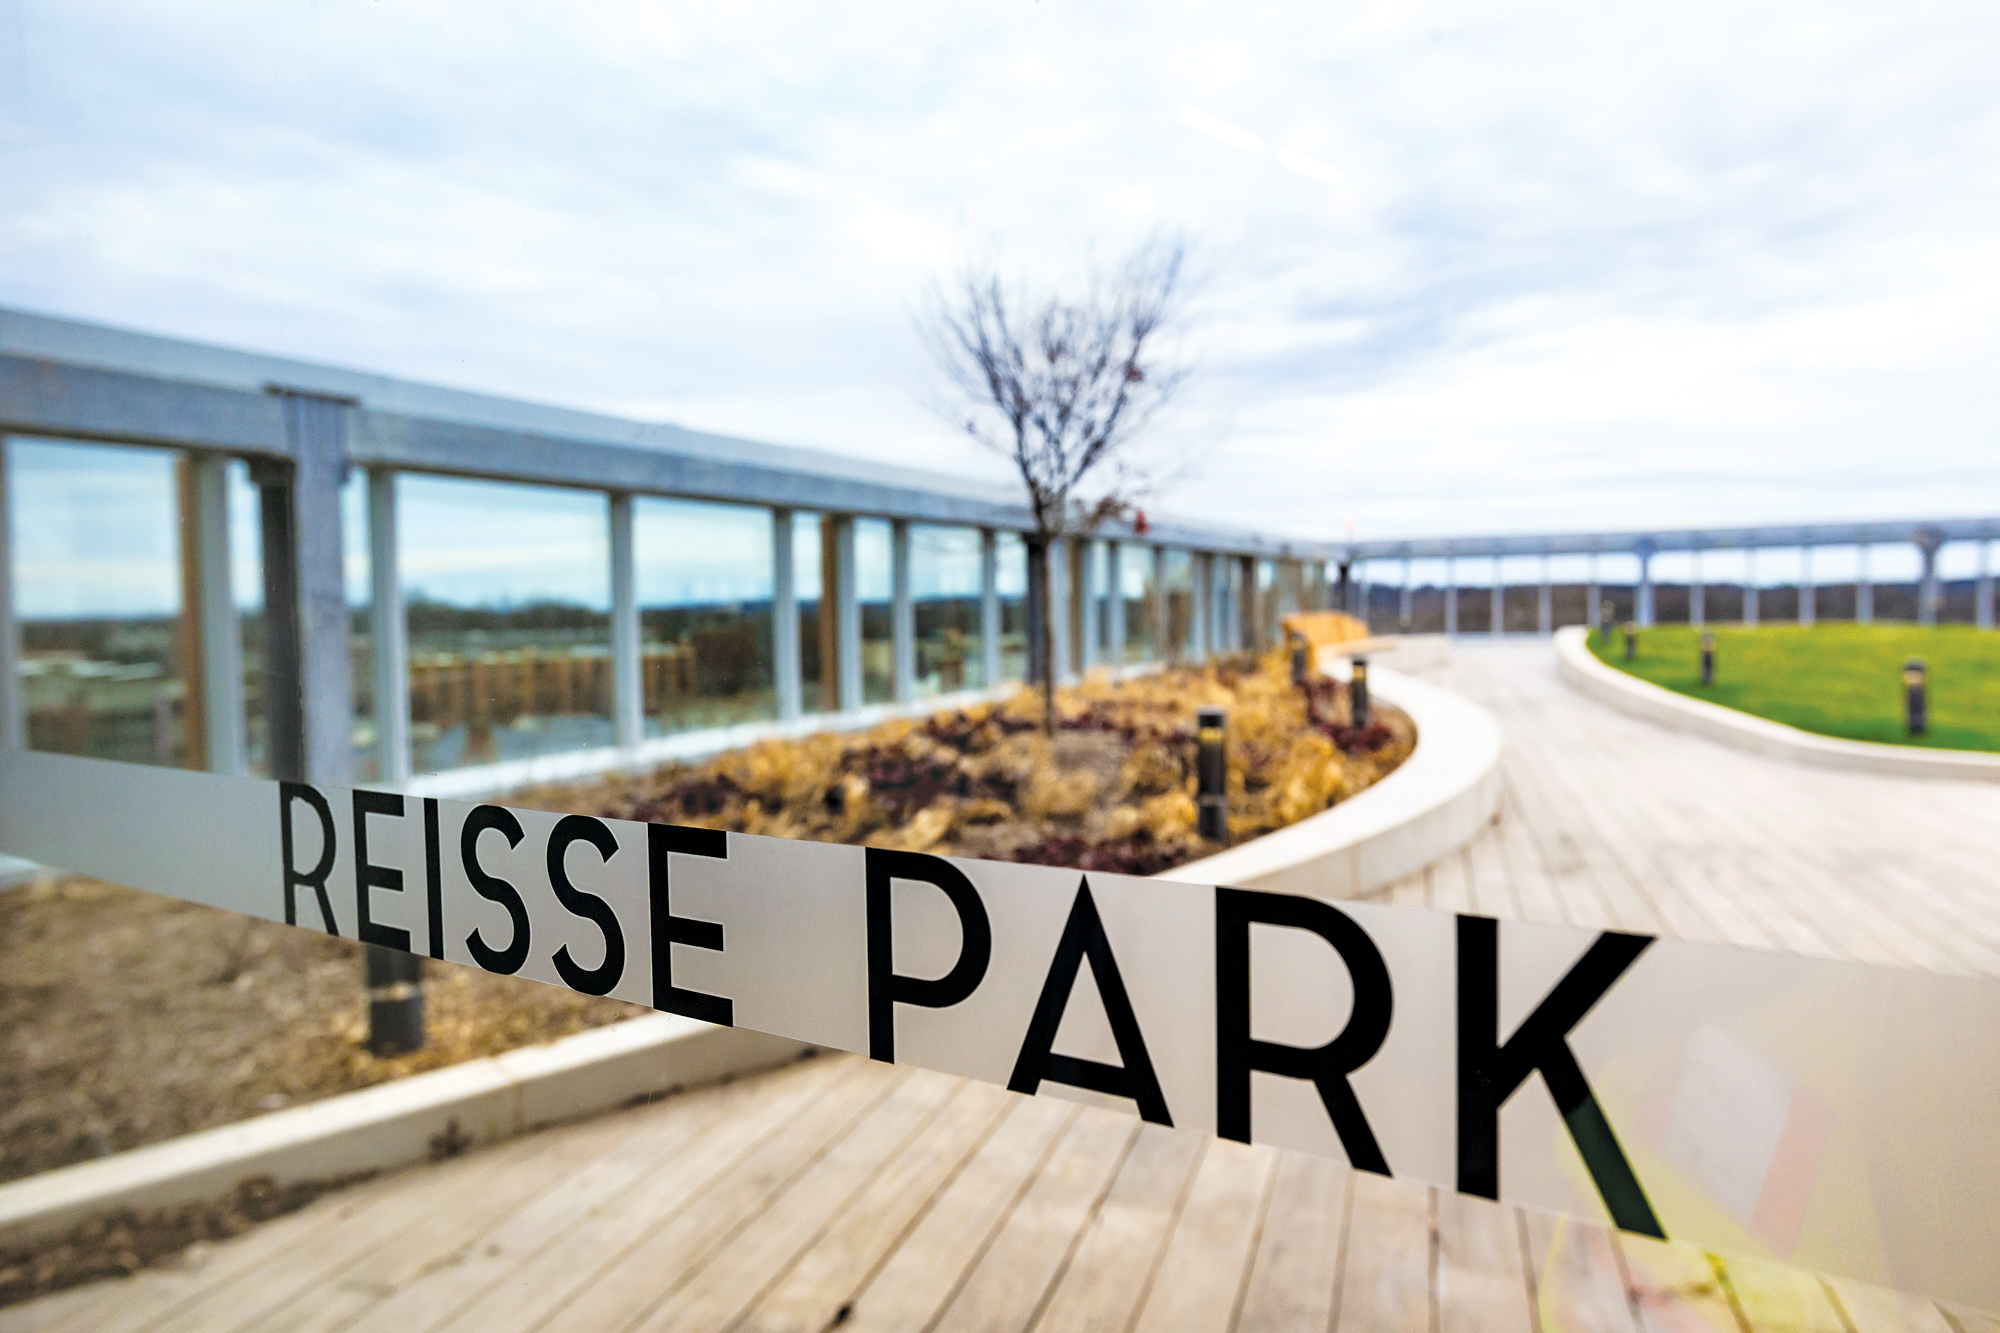 Reisse Park, the Iribe Center's rooftop garden and meeting space. It has lit wooden walking paths and expansive views of College Park and campus.